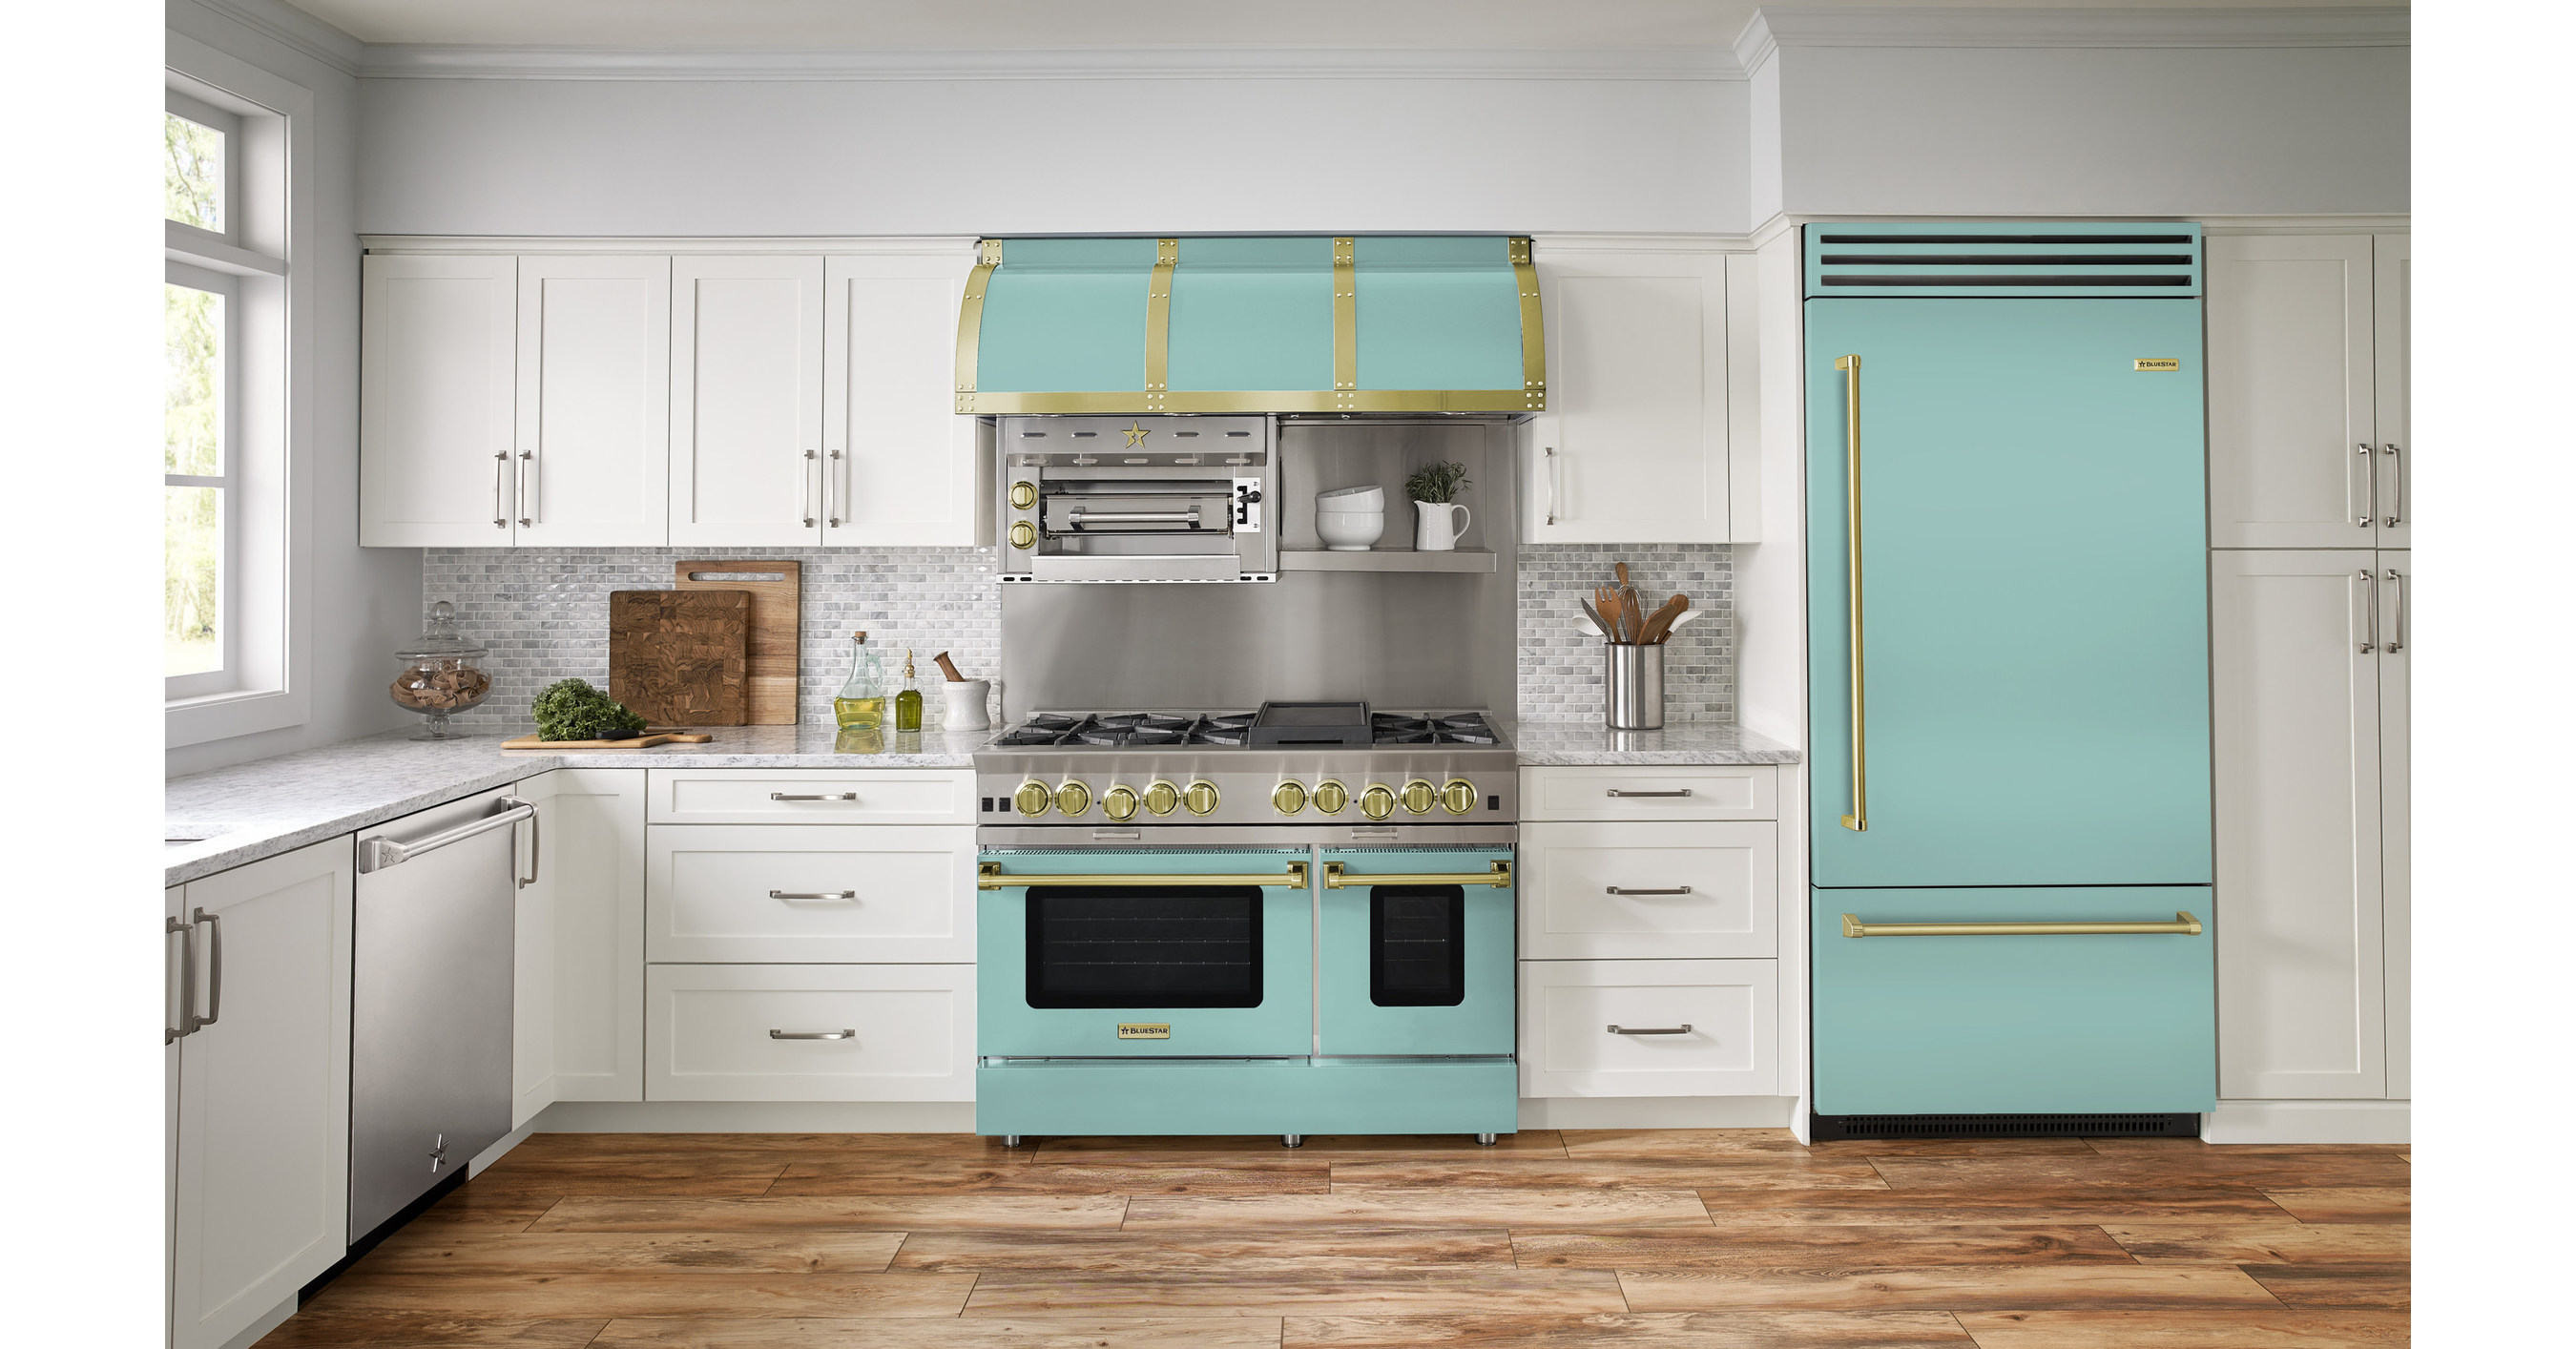 Small Scale Appliances For Small And Tiny Kitchens - BlueStar